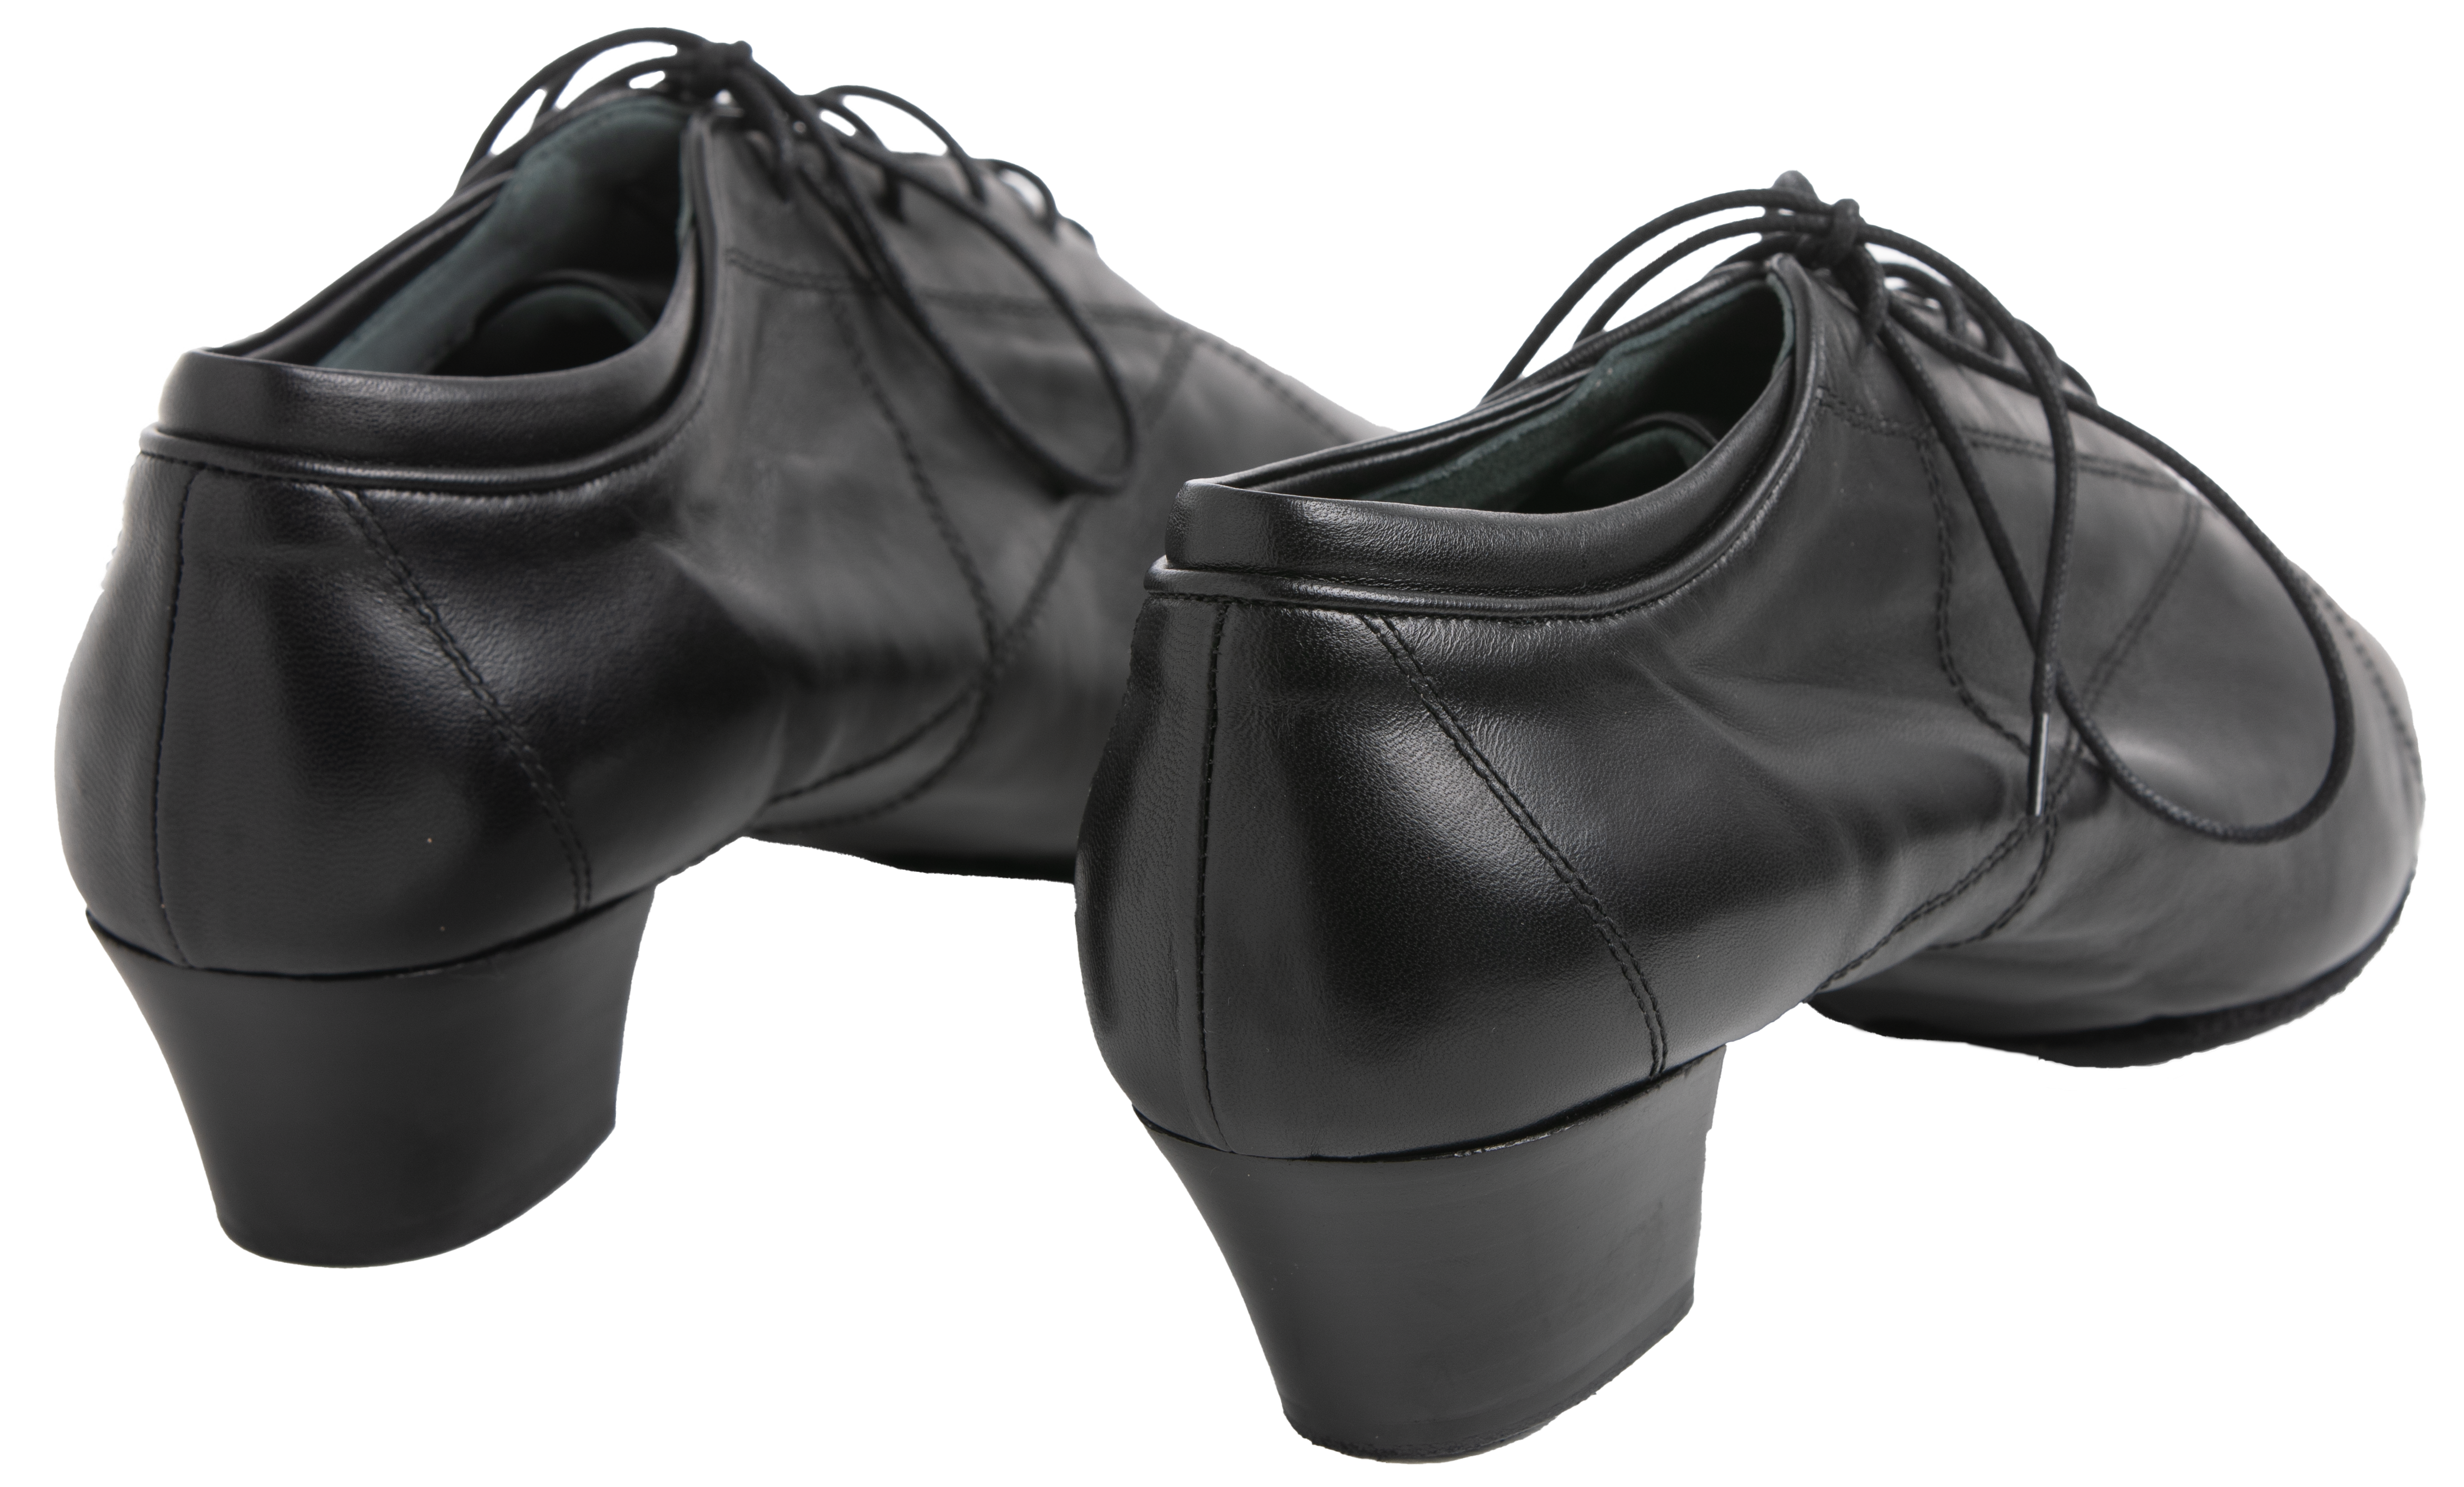 Back view of Roma Men's Latin Dance Shoes in Leather with 4.5 CM heel.